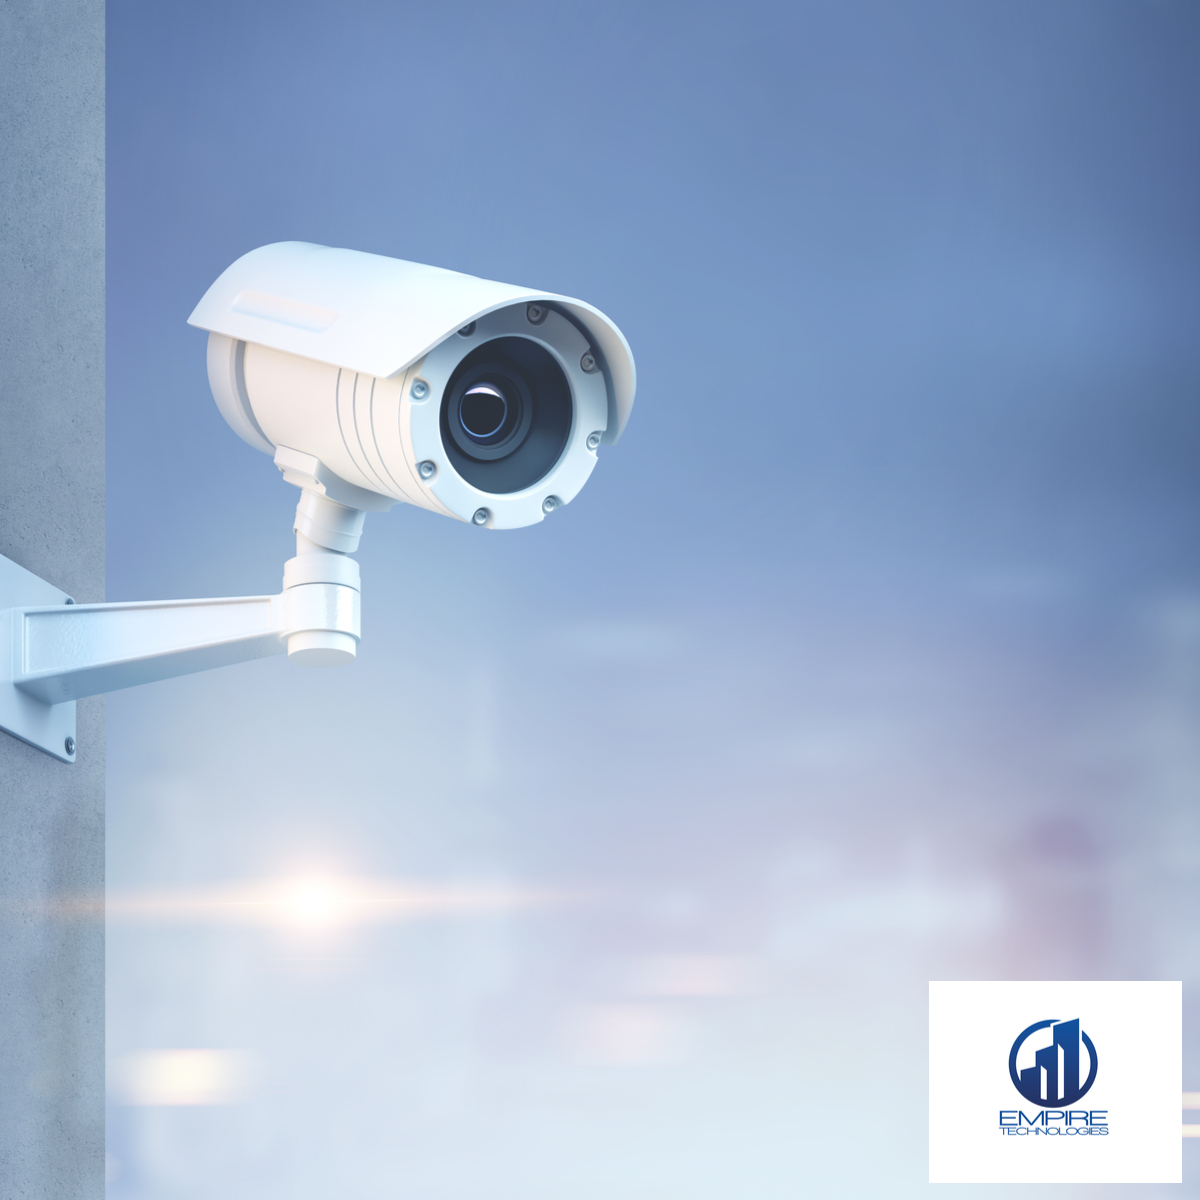 Security Camera Installation To Watch Your Business: So You Don’t Have To